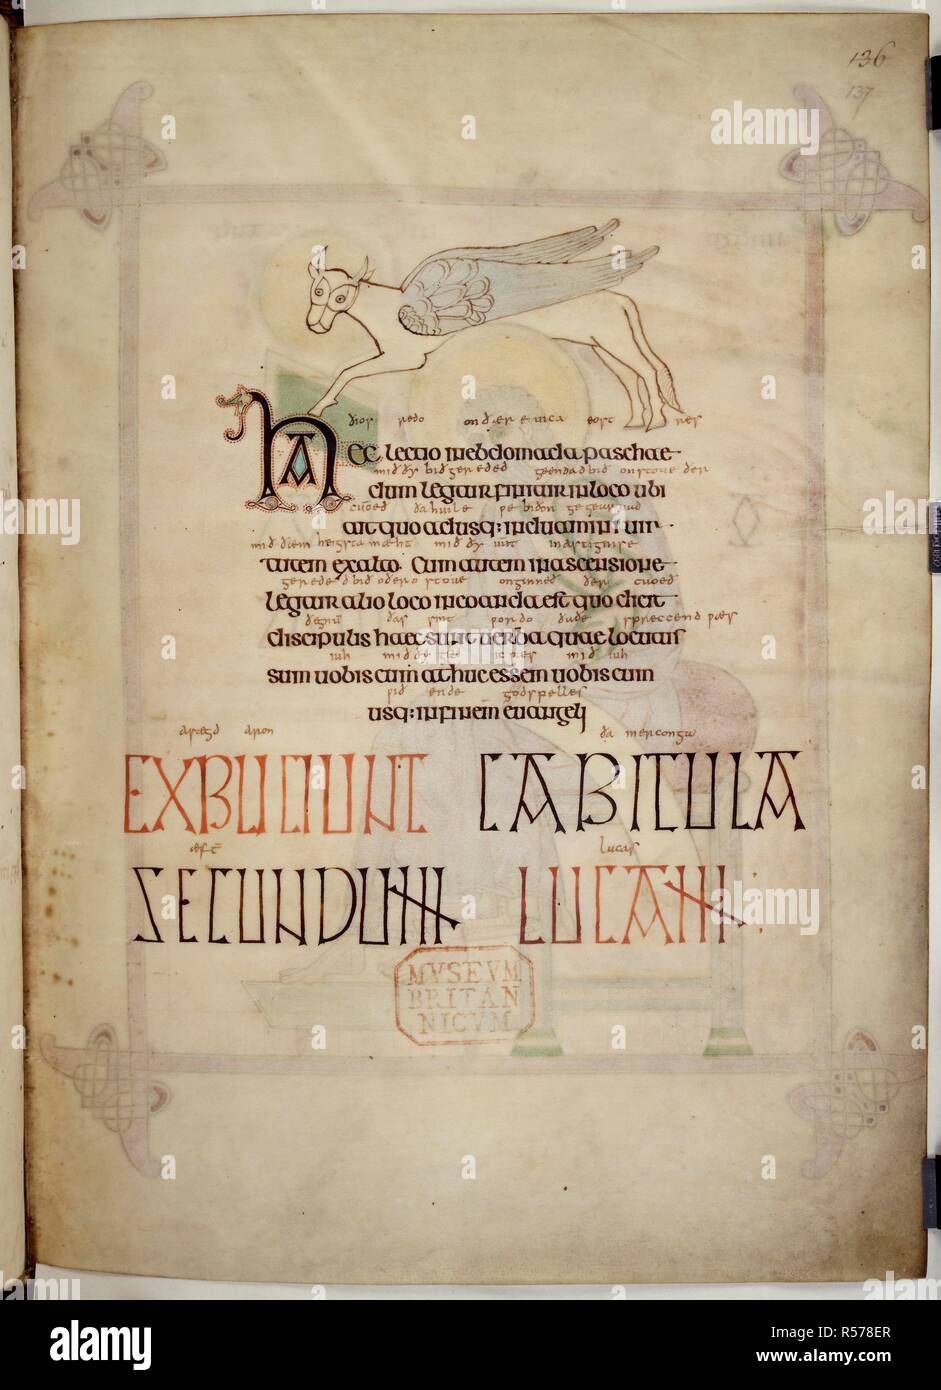 The winged calf of St Luke. Lindisfarne Gospels. N.E. England [Lindisfarne]; 710-721. [Whole folio] Stylized drawing of the symbol of St Luke, the winged calf; with text  Image taken from Lindisfarne Gospels.  Originally published/produced in N.E. England [Lindisfarne]; 710-721. . Source: Cotton Nero D. IV, f.137. Language: Latin, with Anglo-Saxon glosses. Stock Photo